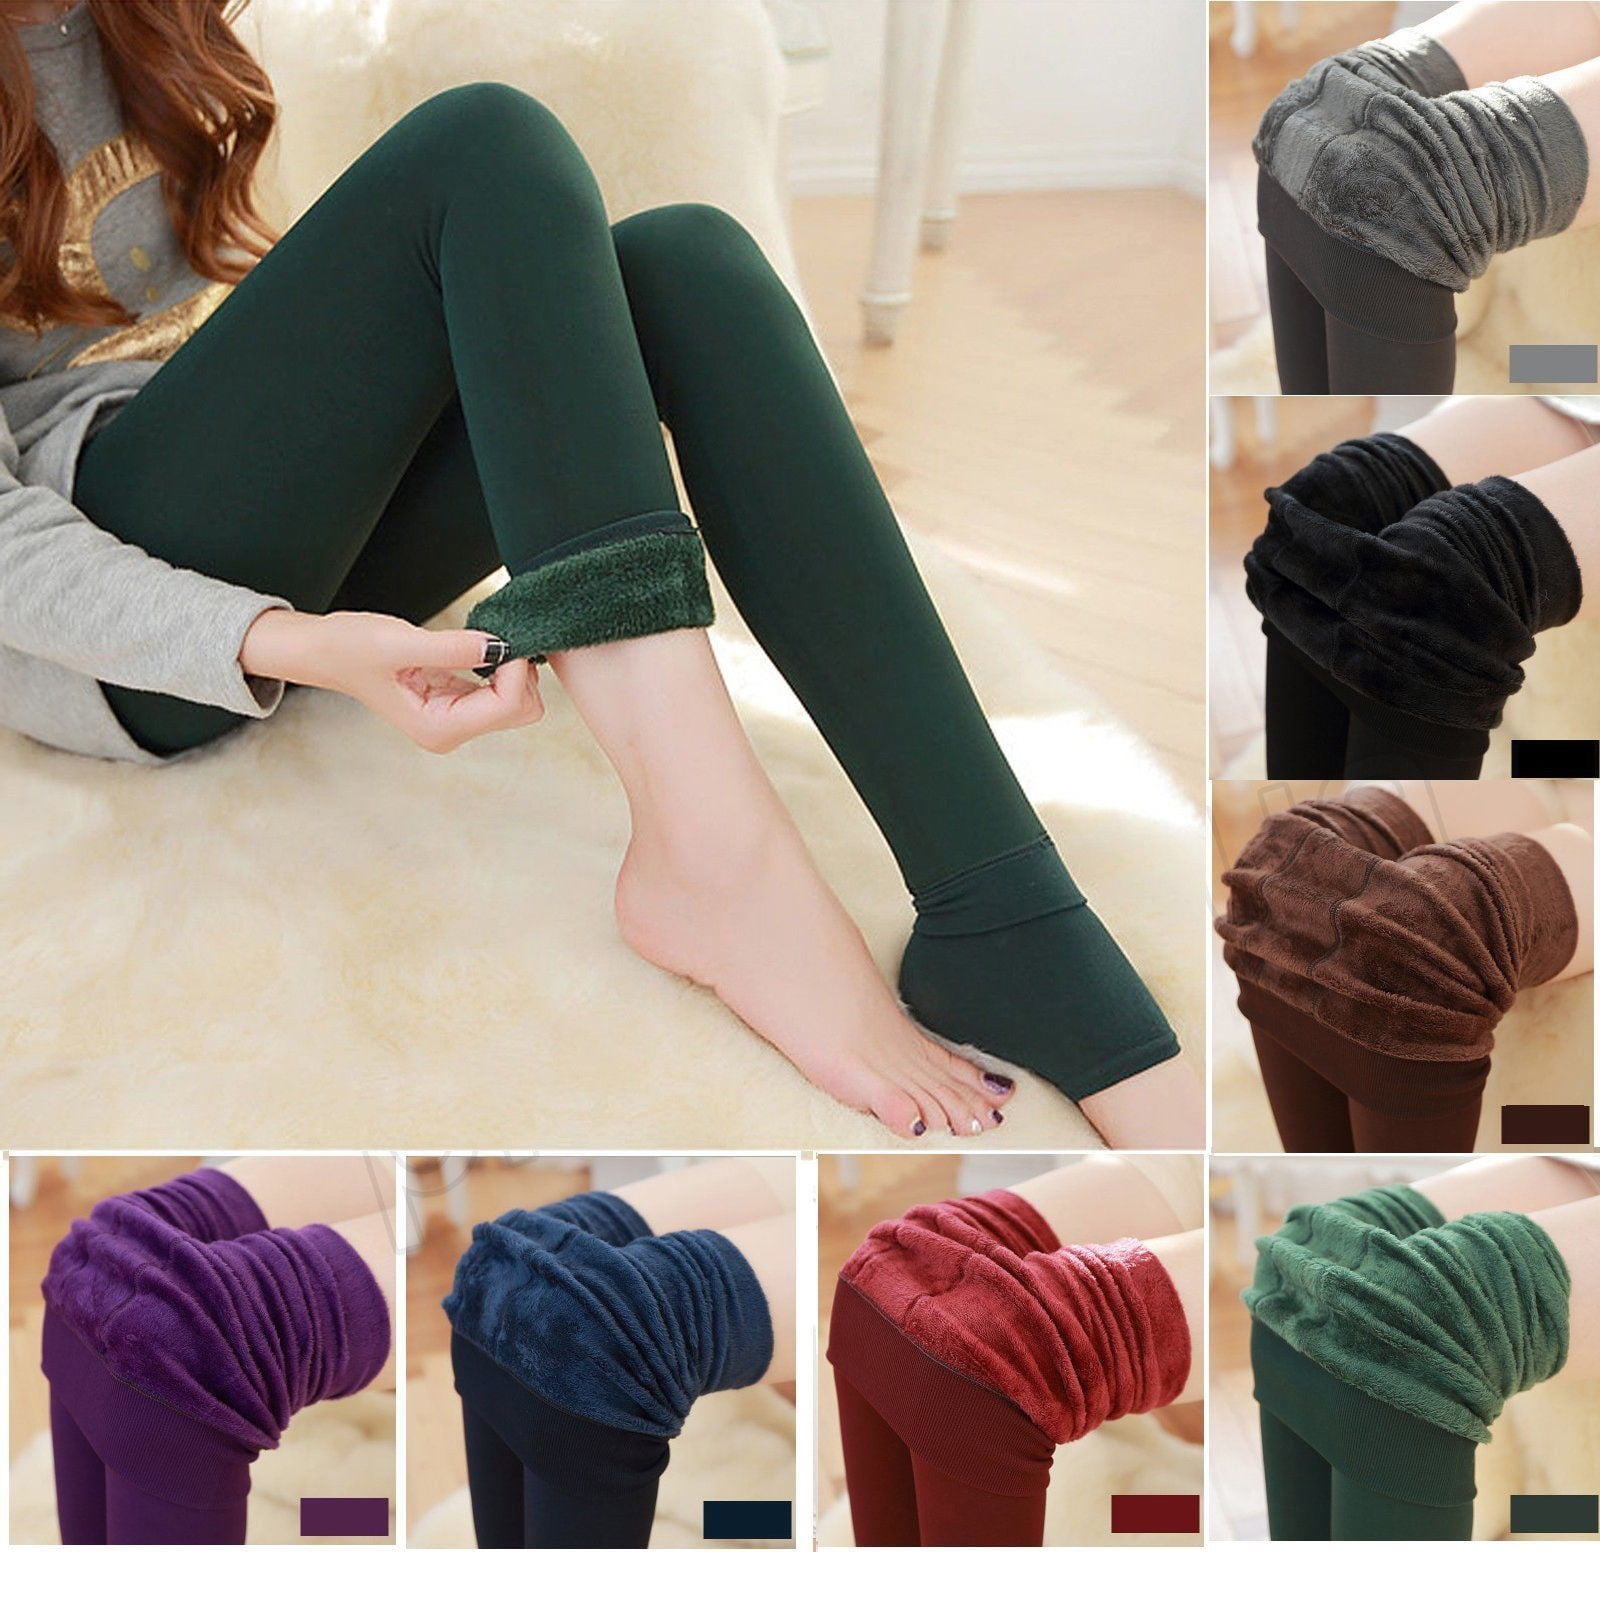 Women Winter Thick Warm Fleece Lined Thermal Stretchy Slim Skinny Leggings Pants 